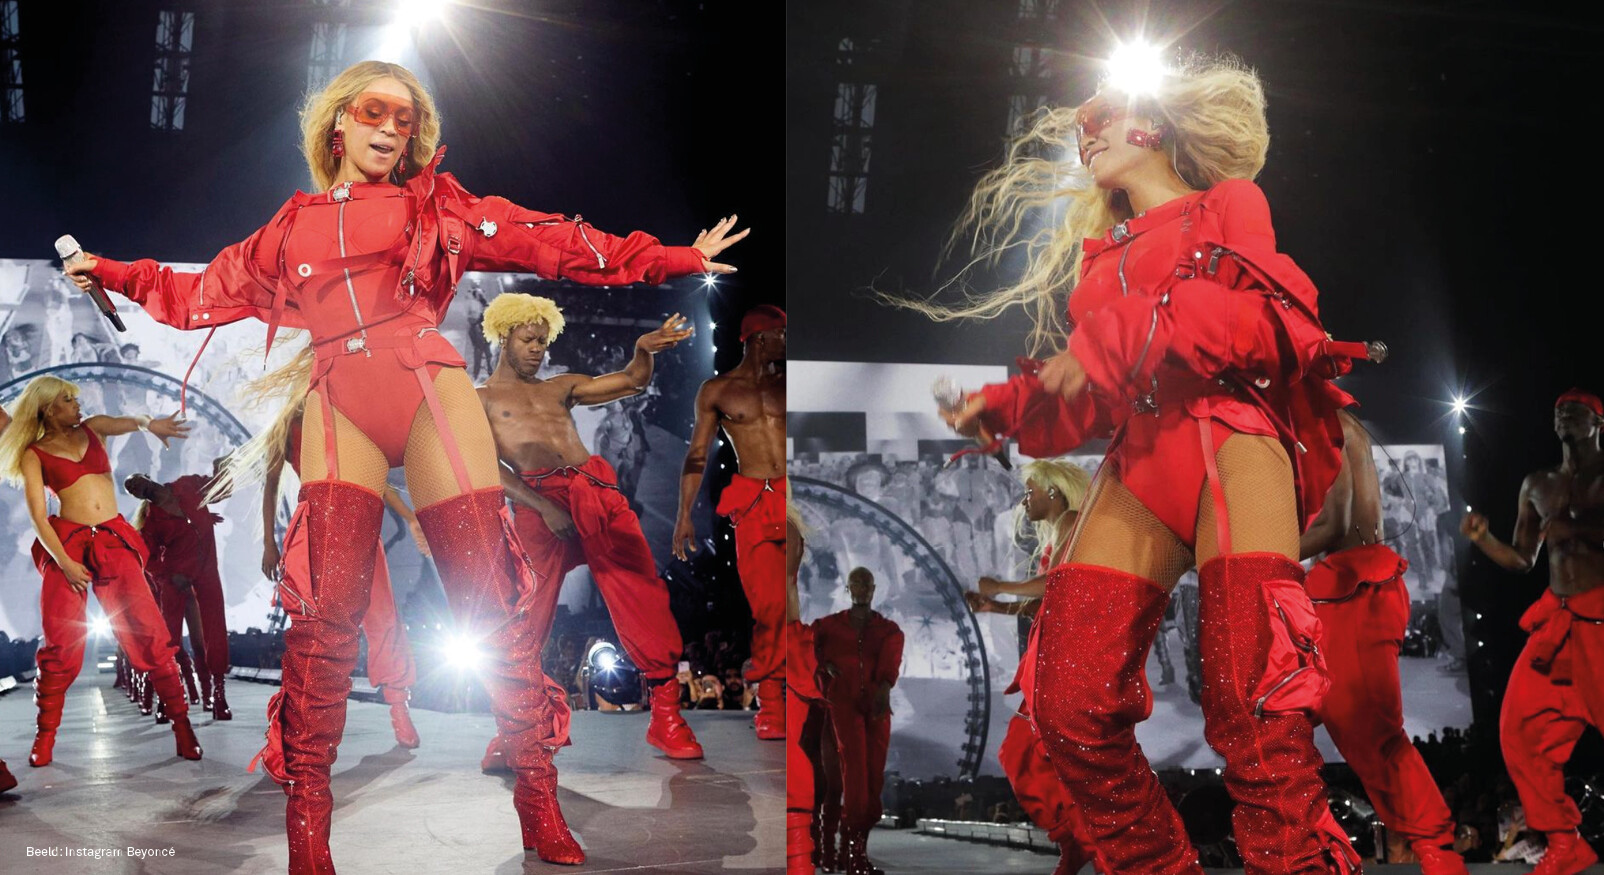 Beyonce optreden Amsterdam rode outfit lachend